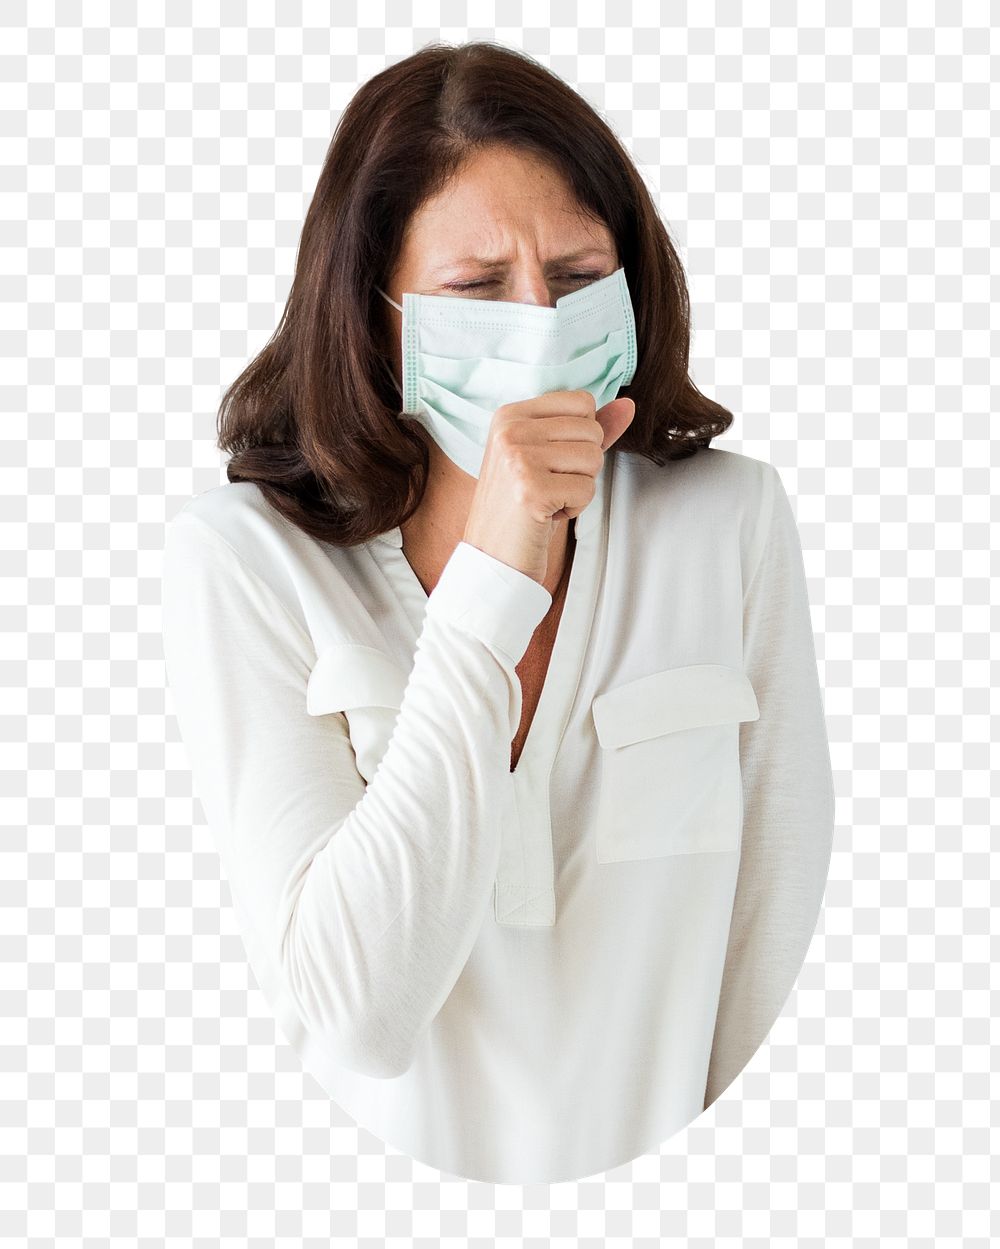 Coughing woman png sticker, transparent background